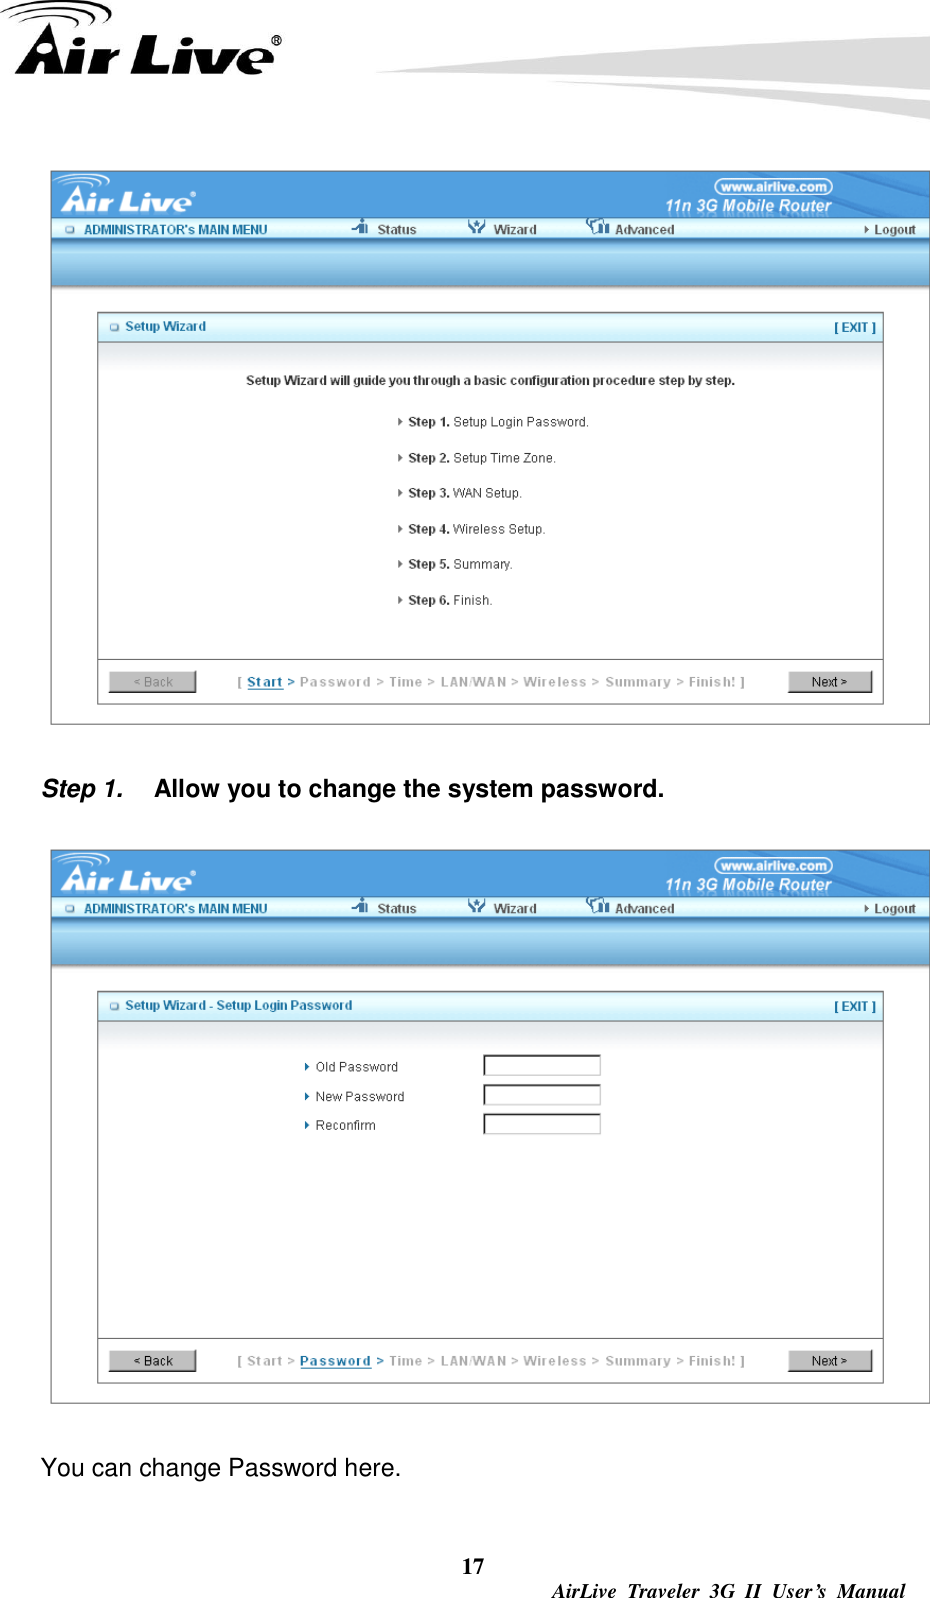  17  AirLive  Traveler  3G  II  User’s  Manual  Step 1.    Allow you to change the system password.  You can change Password here. 